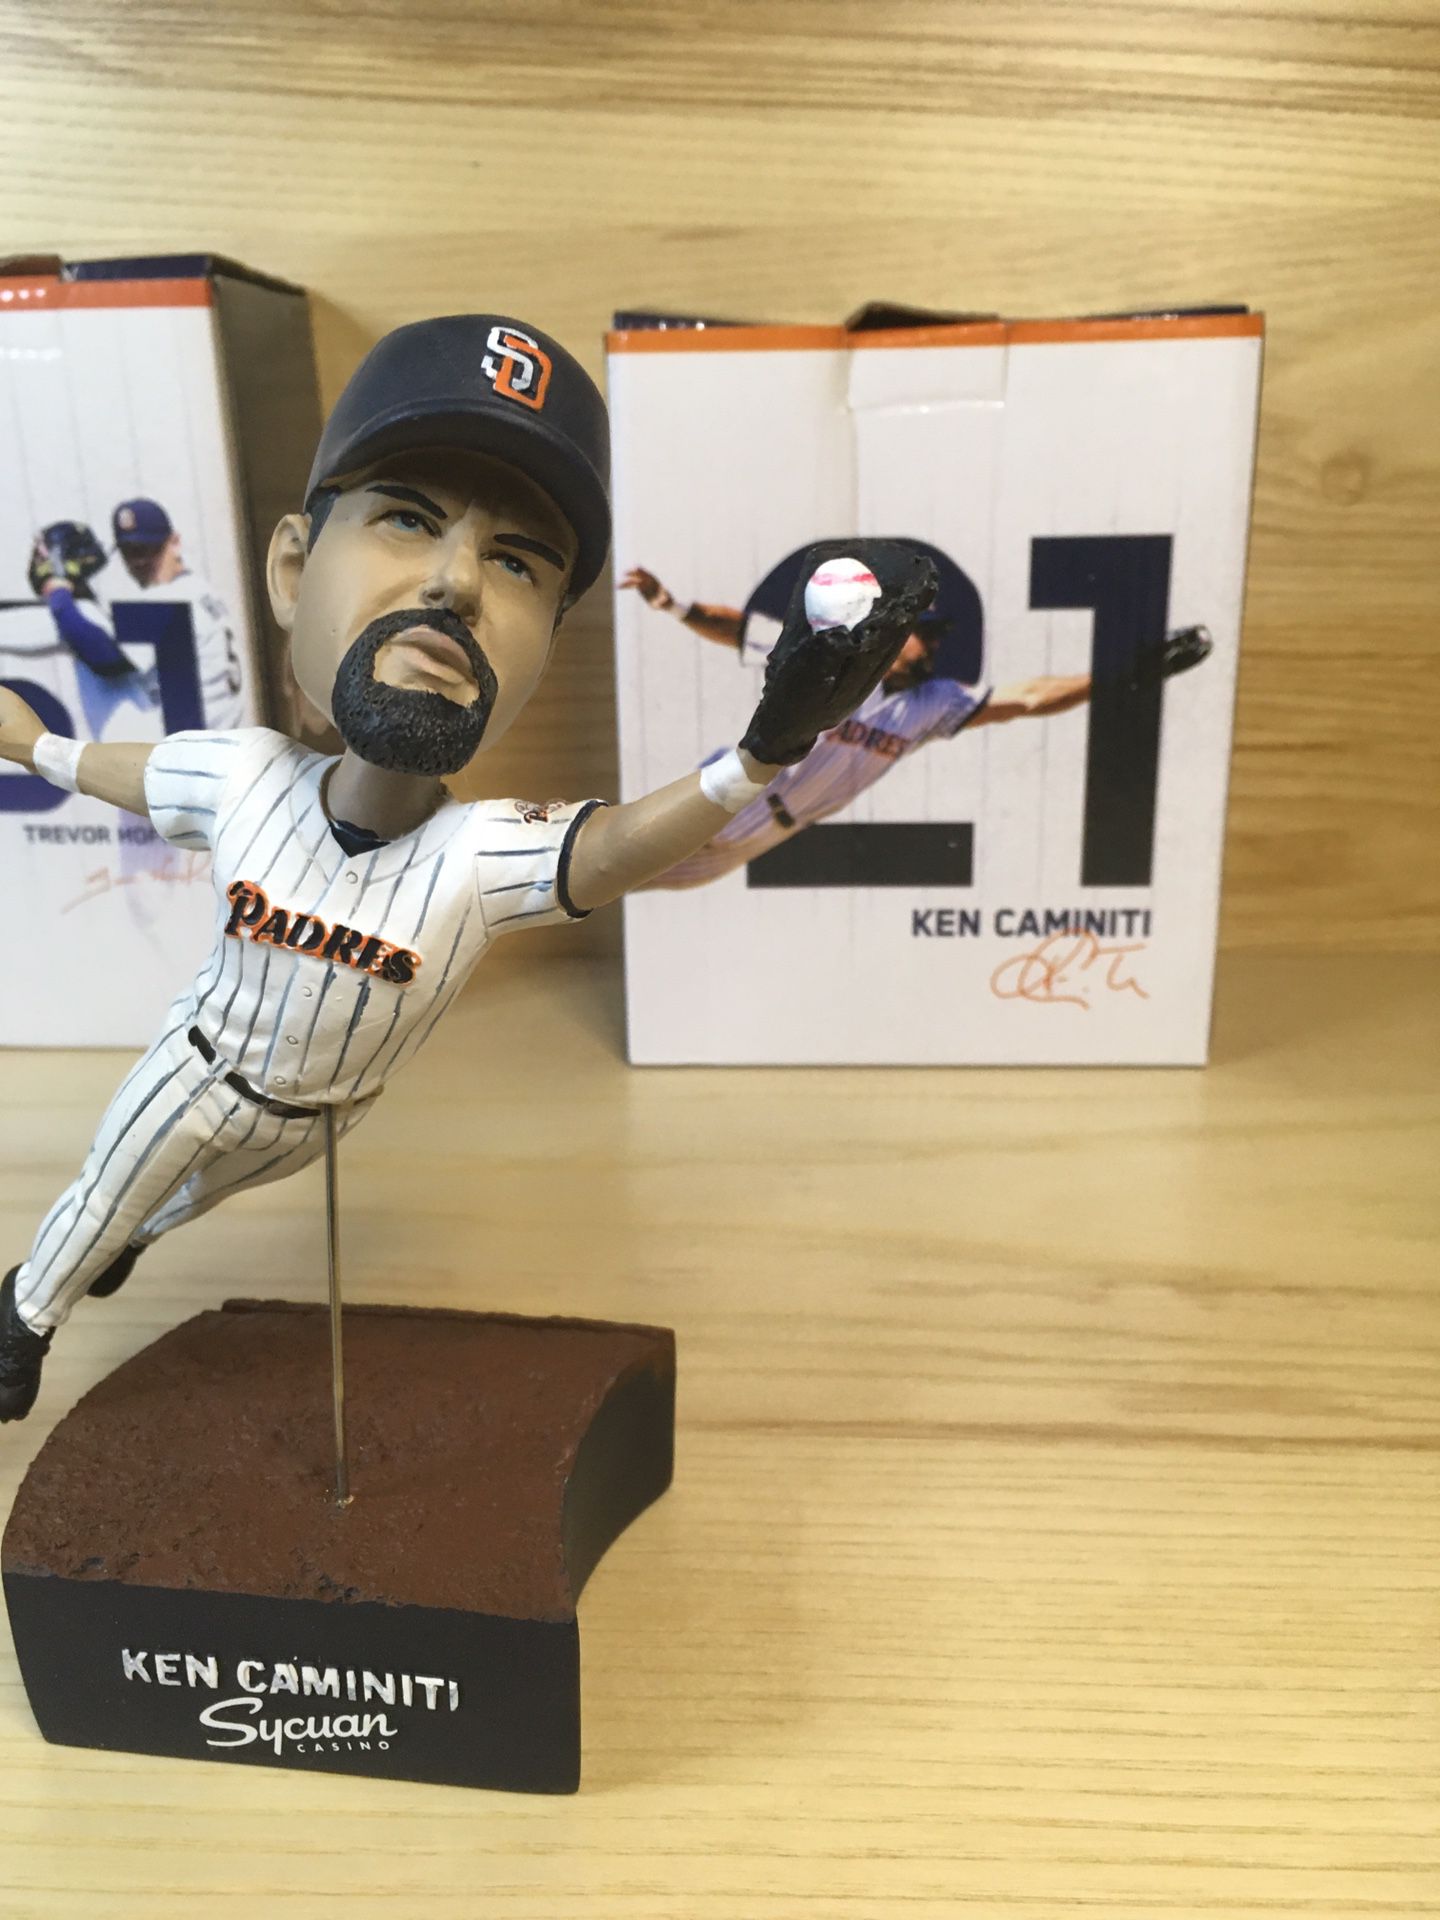 Padres, Other, Ken Caminiti Padres Bobble Head